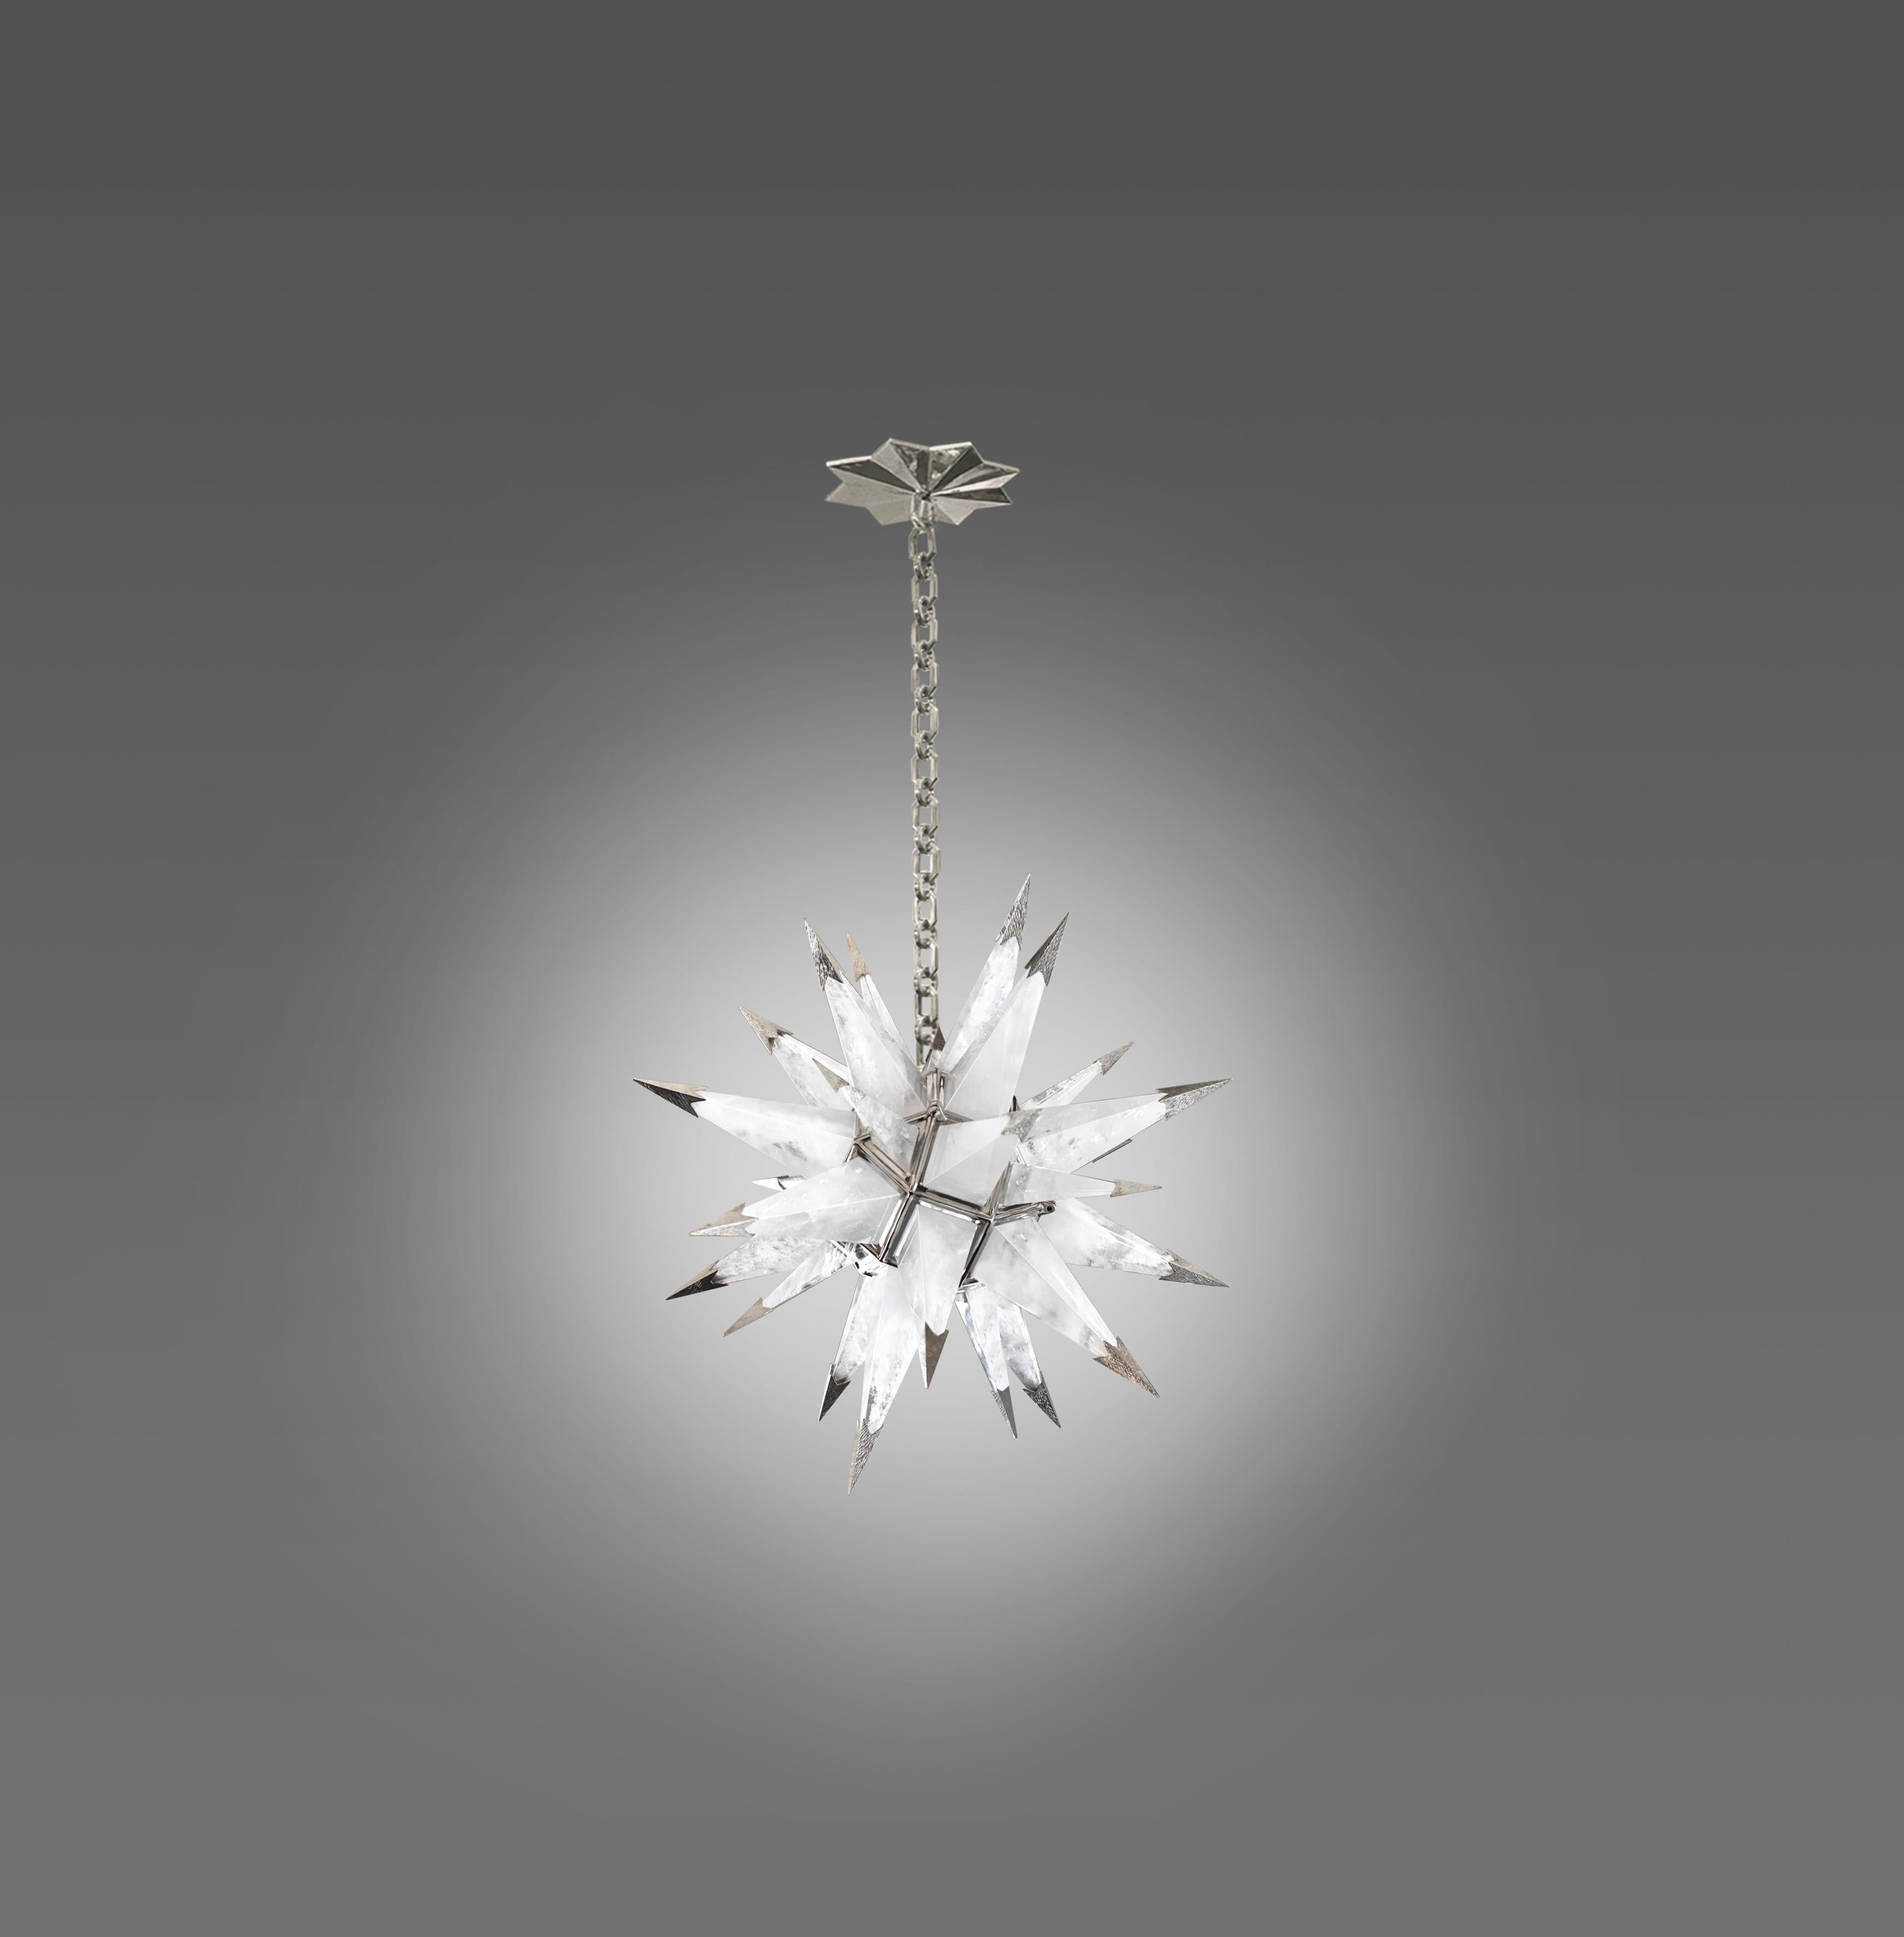 A finely carved star form rock crystal chandelier with nickel plating finishes frame and tips. Created by Phoenix Gallery, NYC.
The chandelier is 21.5